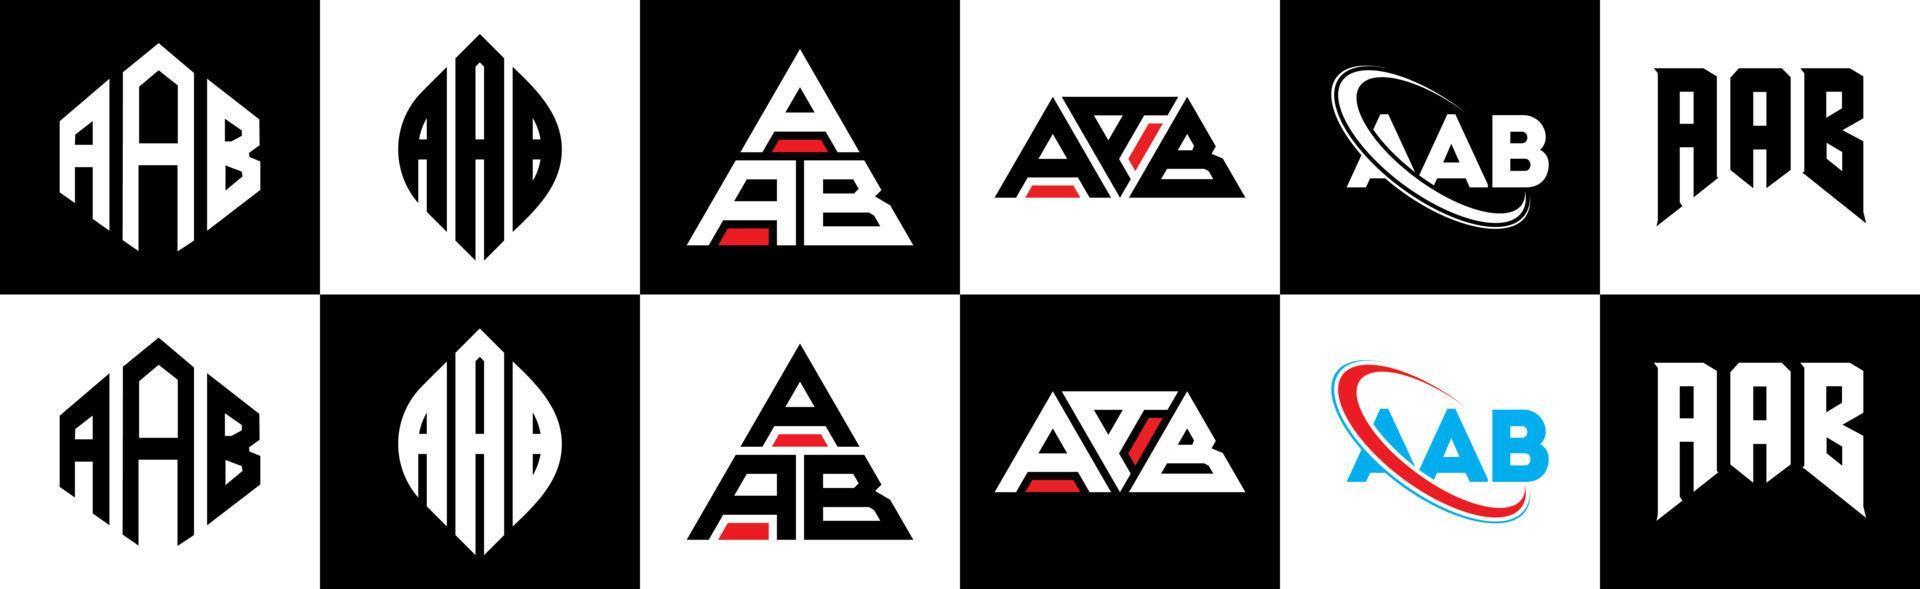 AAB letter logo design in six style. AAB polygon, circle, triangle, hexagon, flat and simple style with black and white color variation letter logo set in one artboard. AAB minimalist and classic logo vector